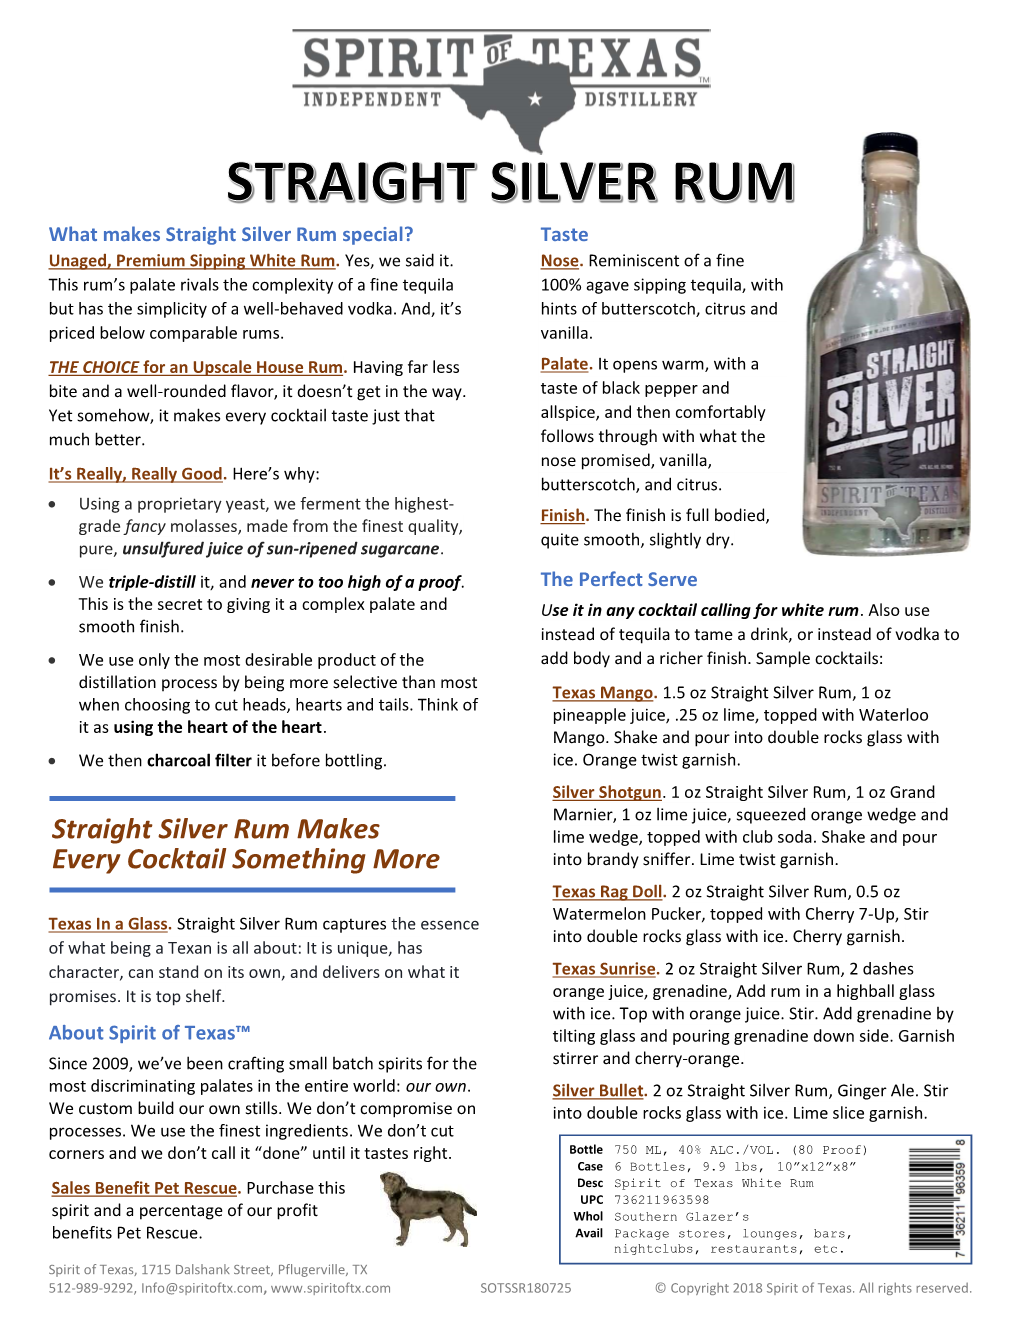 Straight Silver Rum Makes Every Cocktail Something More